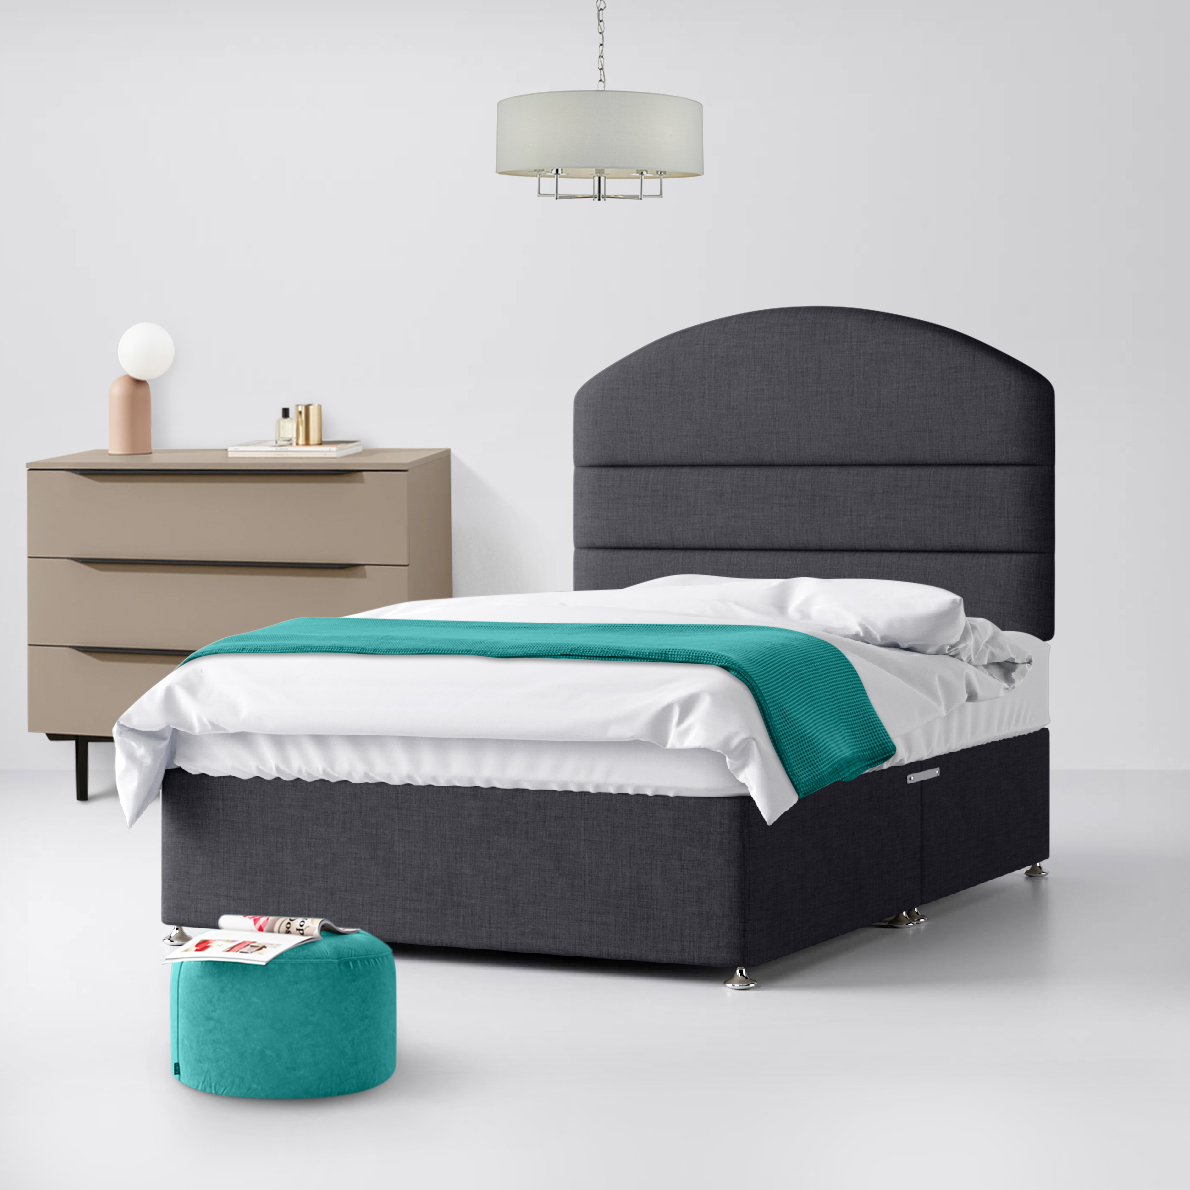 Double - Divan Bed and Dudley Lined Headboard - Dark Grey - Charcoal - Fabric - 4ft6 - Happy Beds